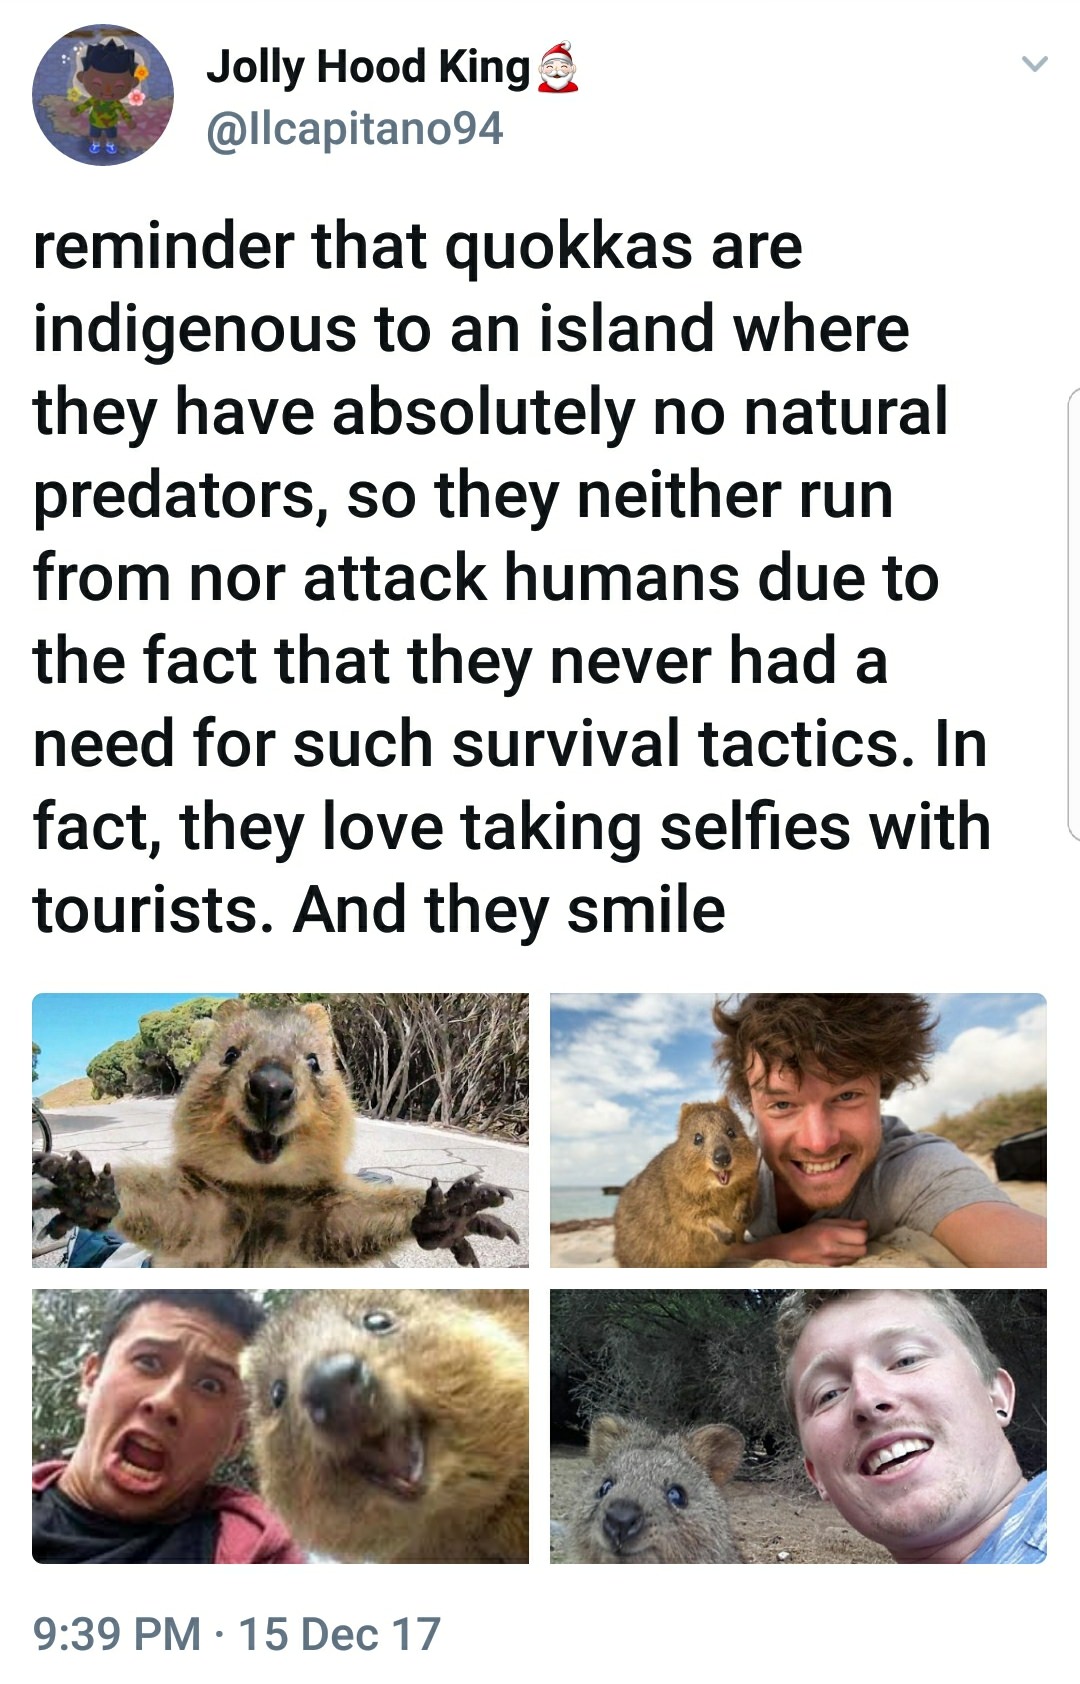 animal on island with no predators - Jolly Hood King 3 reminder that quokkas are indigenous to an island where they have absolutely no natural predators, so they neither run from nor attack humans due to the fact that they never had a need for such surviv